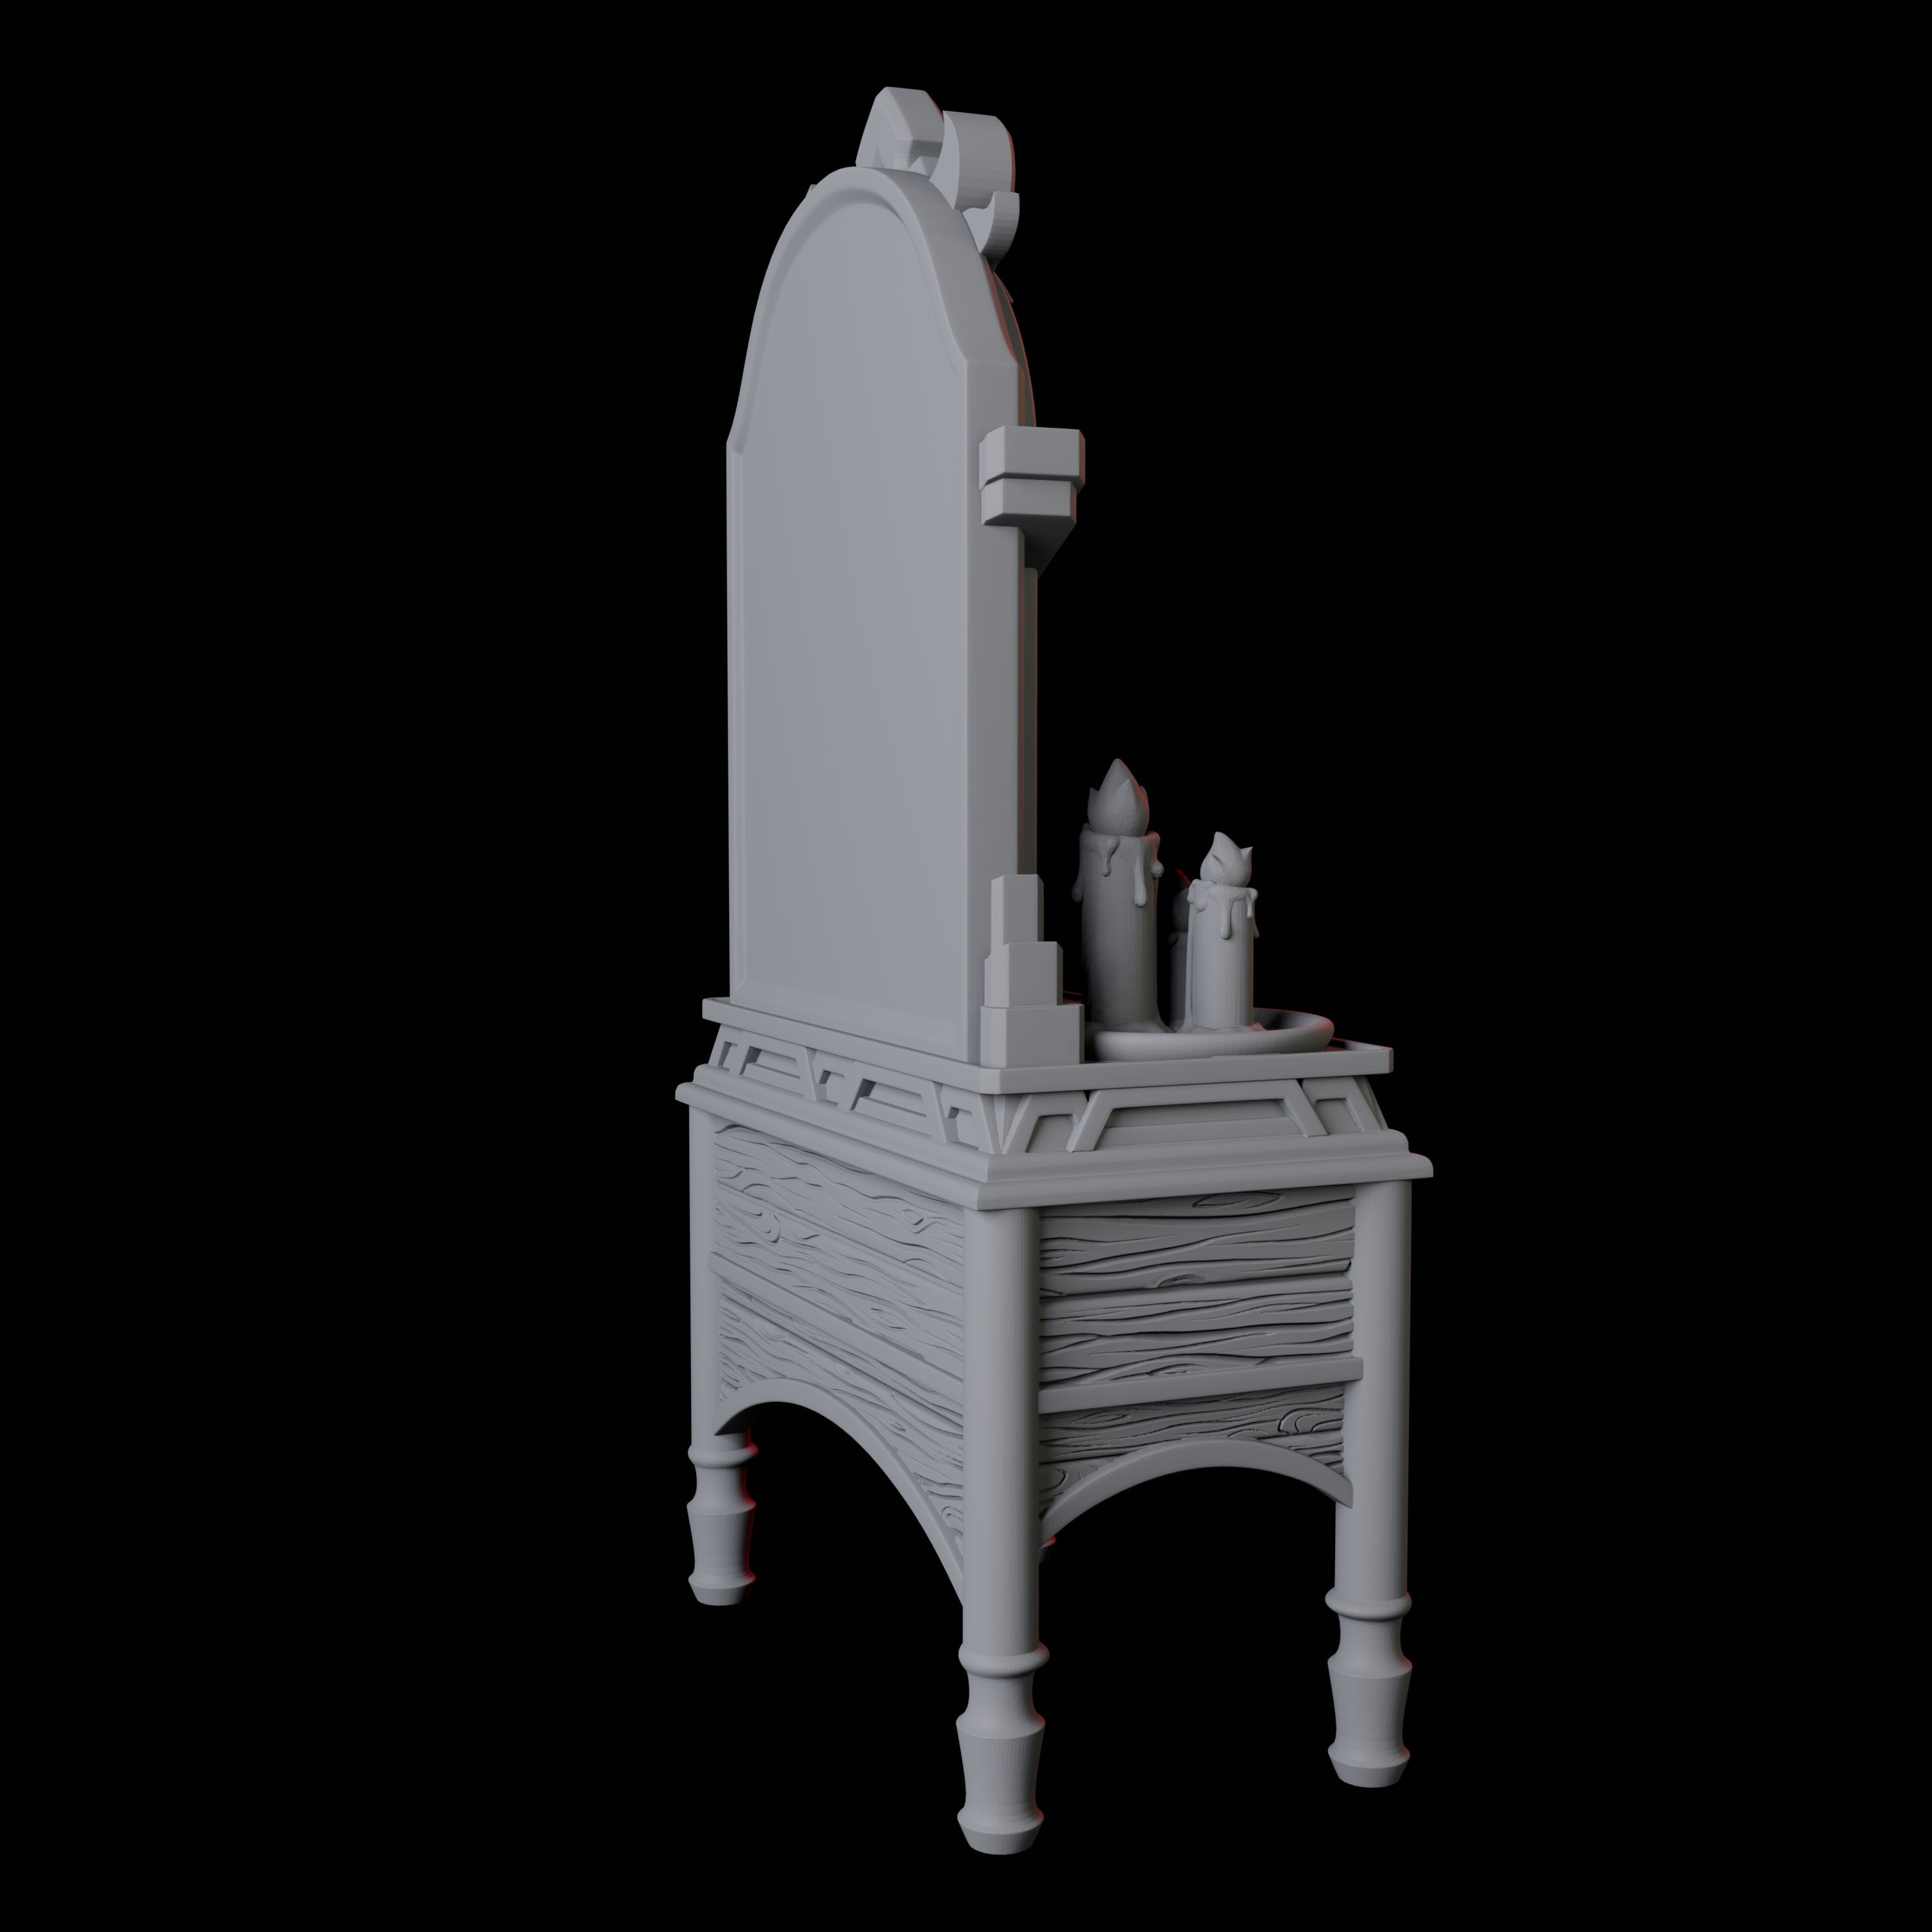 Dressing Table Miniature for Dungeons and Dragons, Pathfinder or other TTRPGs